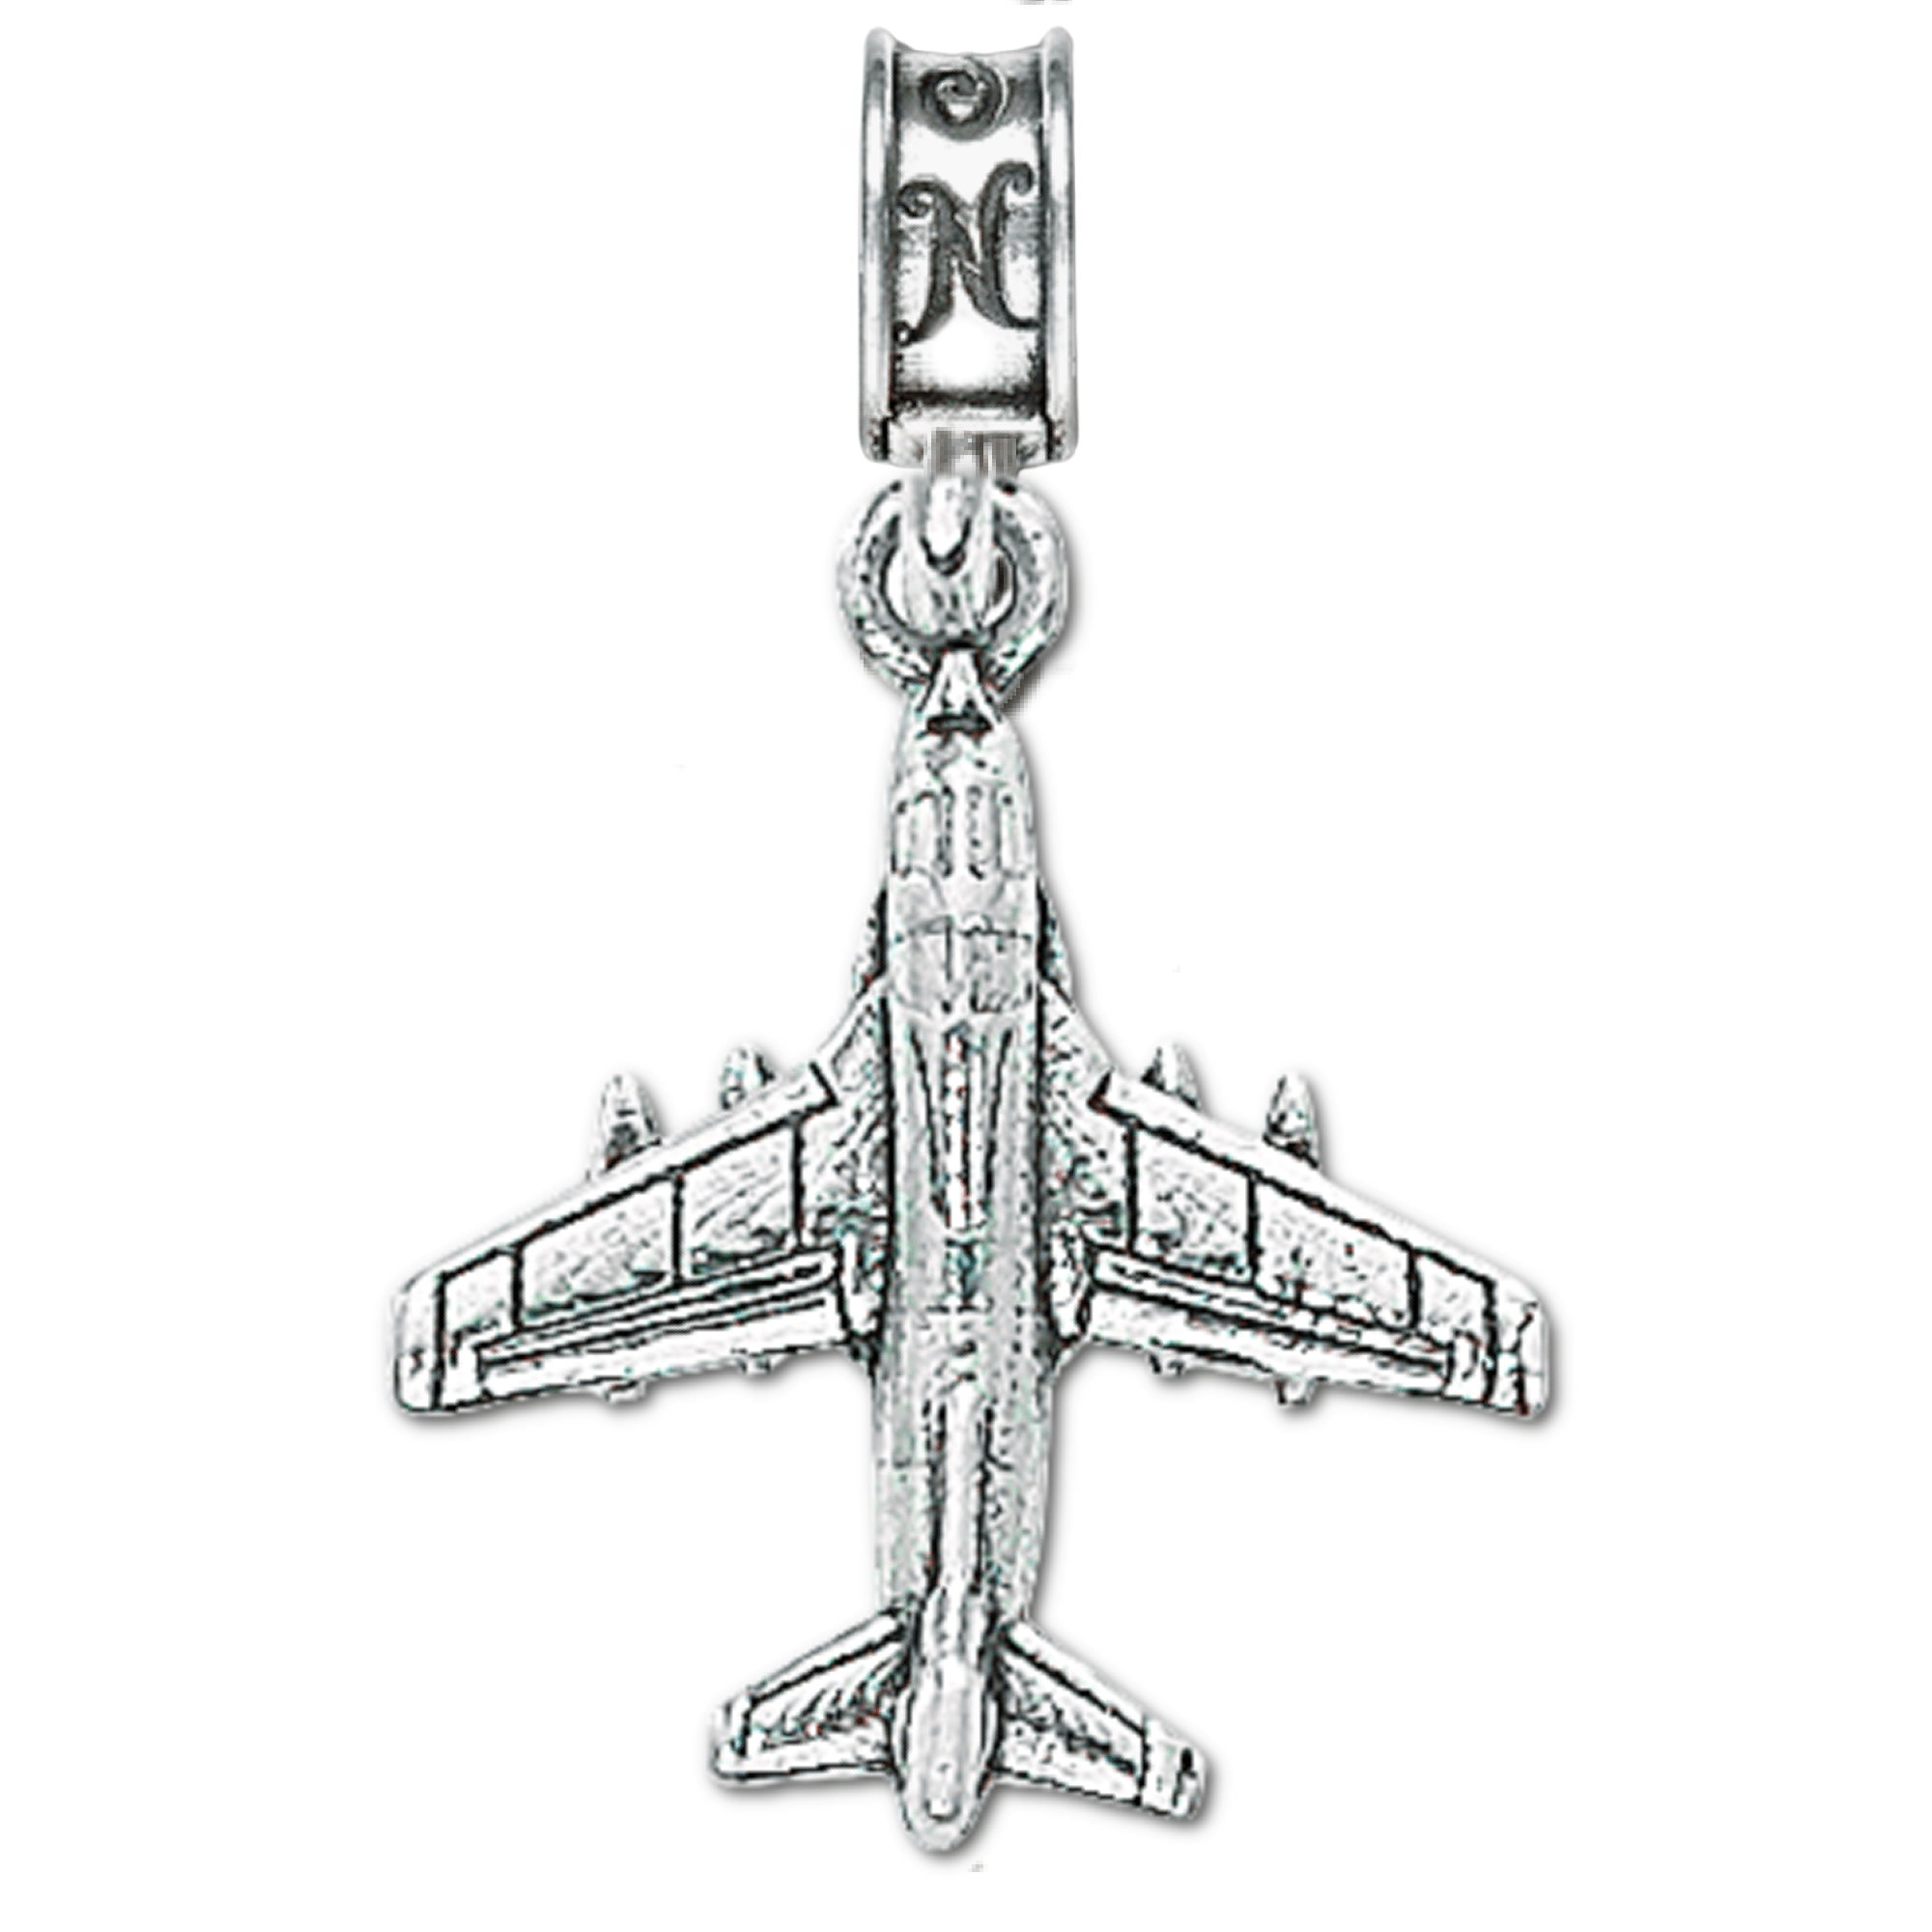 Military Jewelry, Military Charms, Military Gifts, Military Aviation, Prowler Aircraft Charm